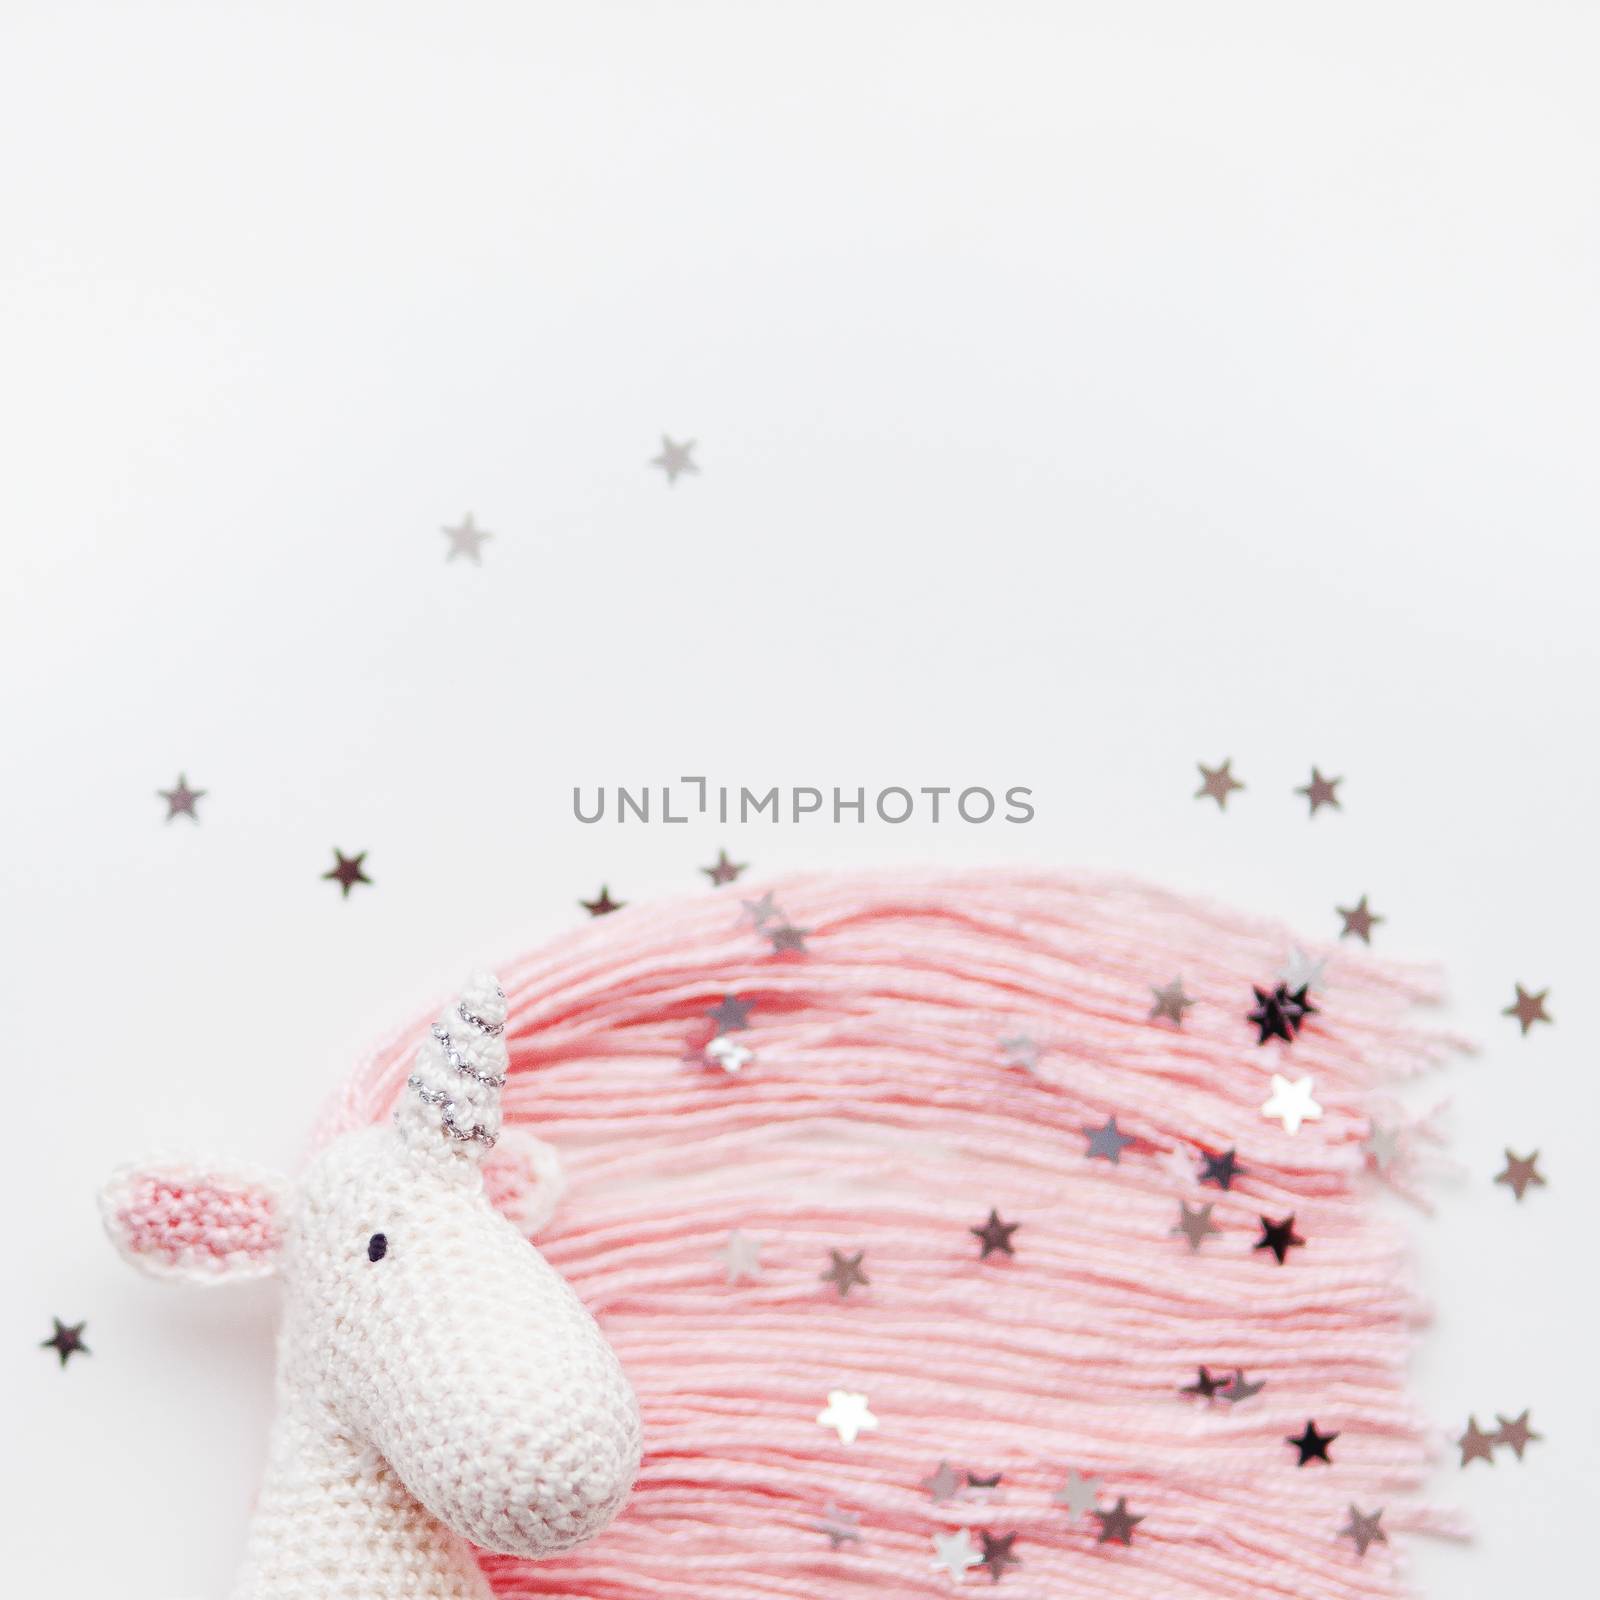 Cute fairy unicorn with a pink mane and a tail made of threads. Crocheted hand made toy on white background with silver stars confetti. Trendy creature, symbol of magic and miracles. Place for text. by aksenovko